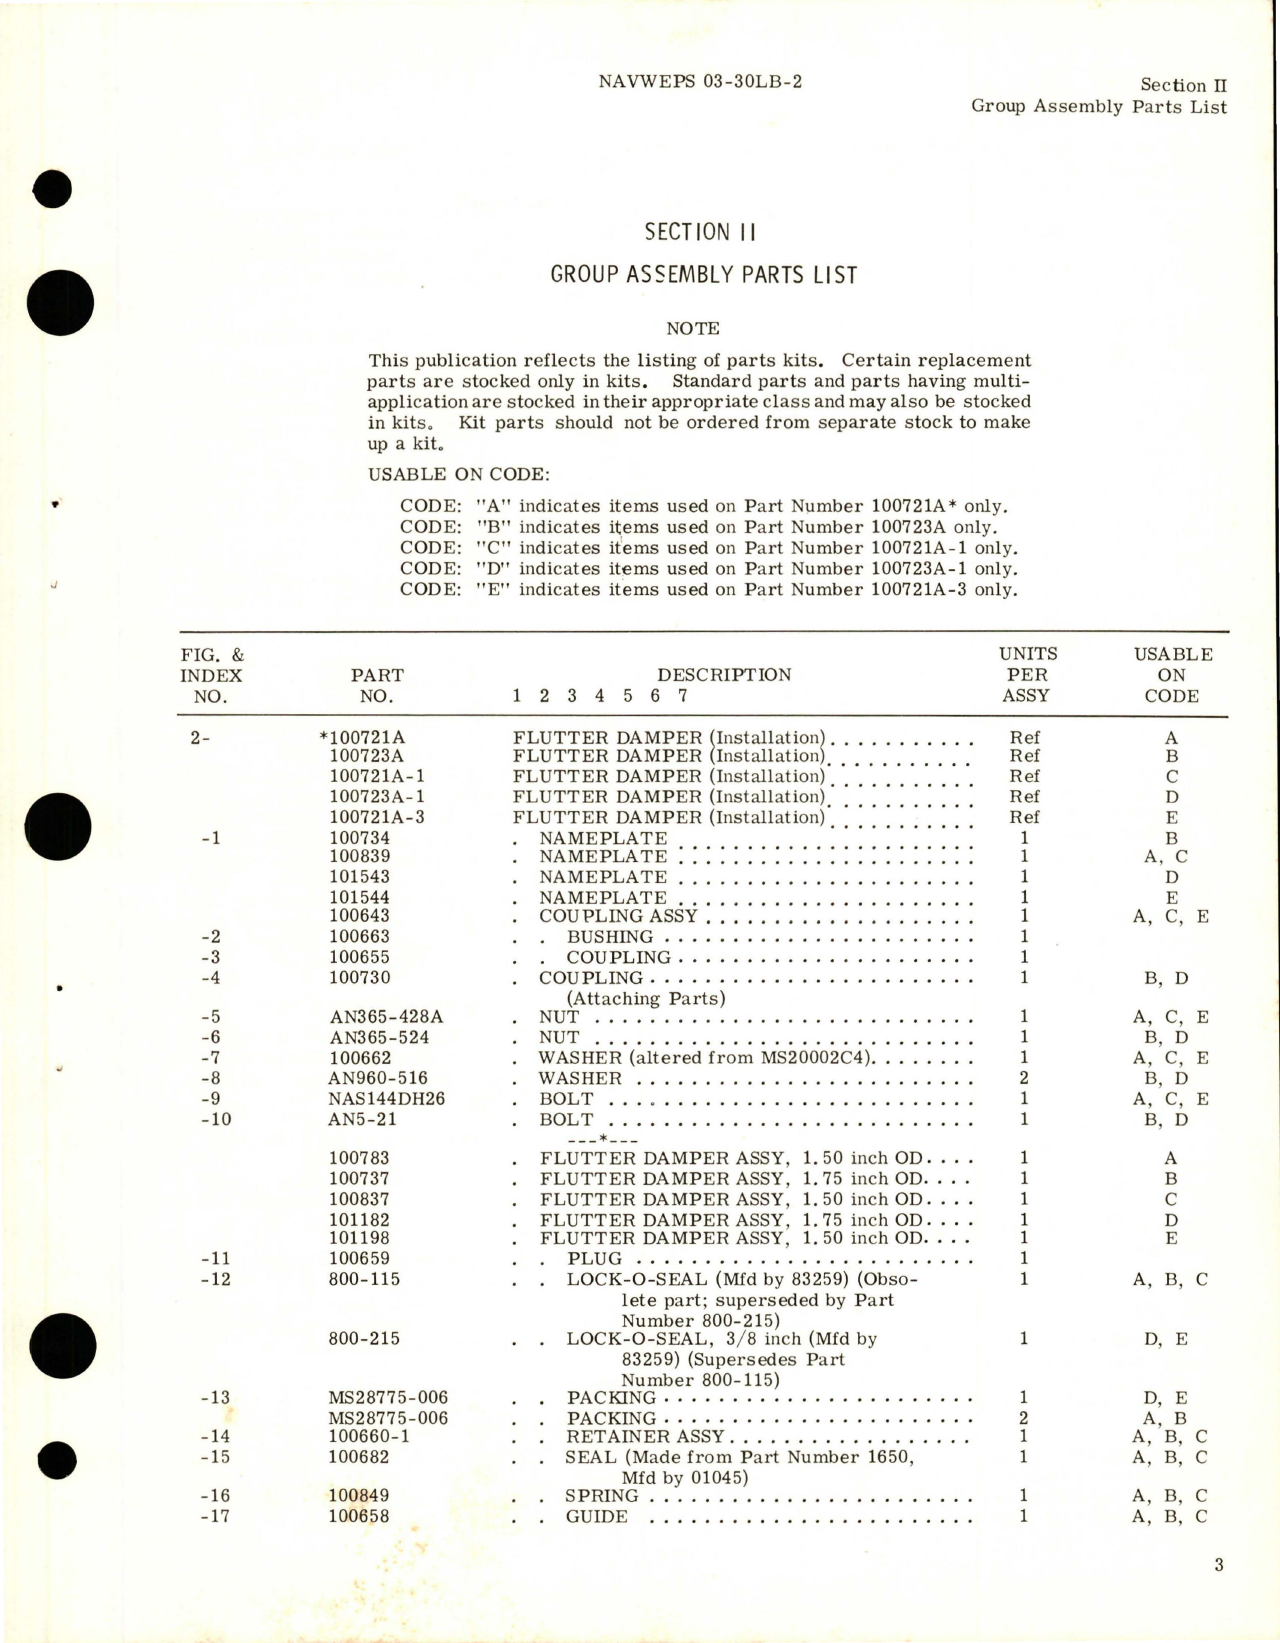 Sample page 5 from AirCorps Library document: Illustrated Parts Breakdown for Flutter Dampers - Parts 100721A, 100721A-1, 100721A-3, 100723A & 100723A-1